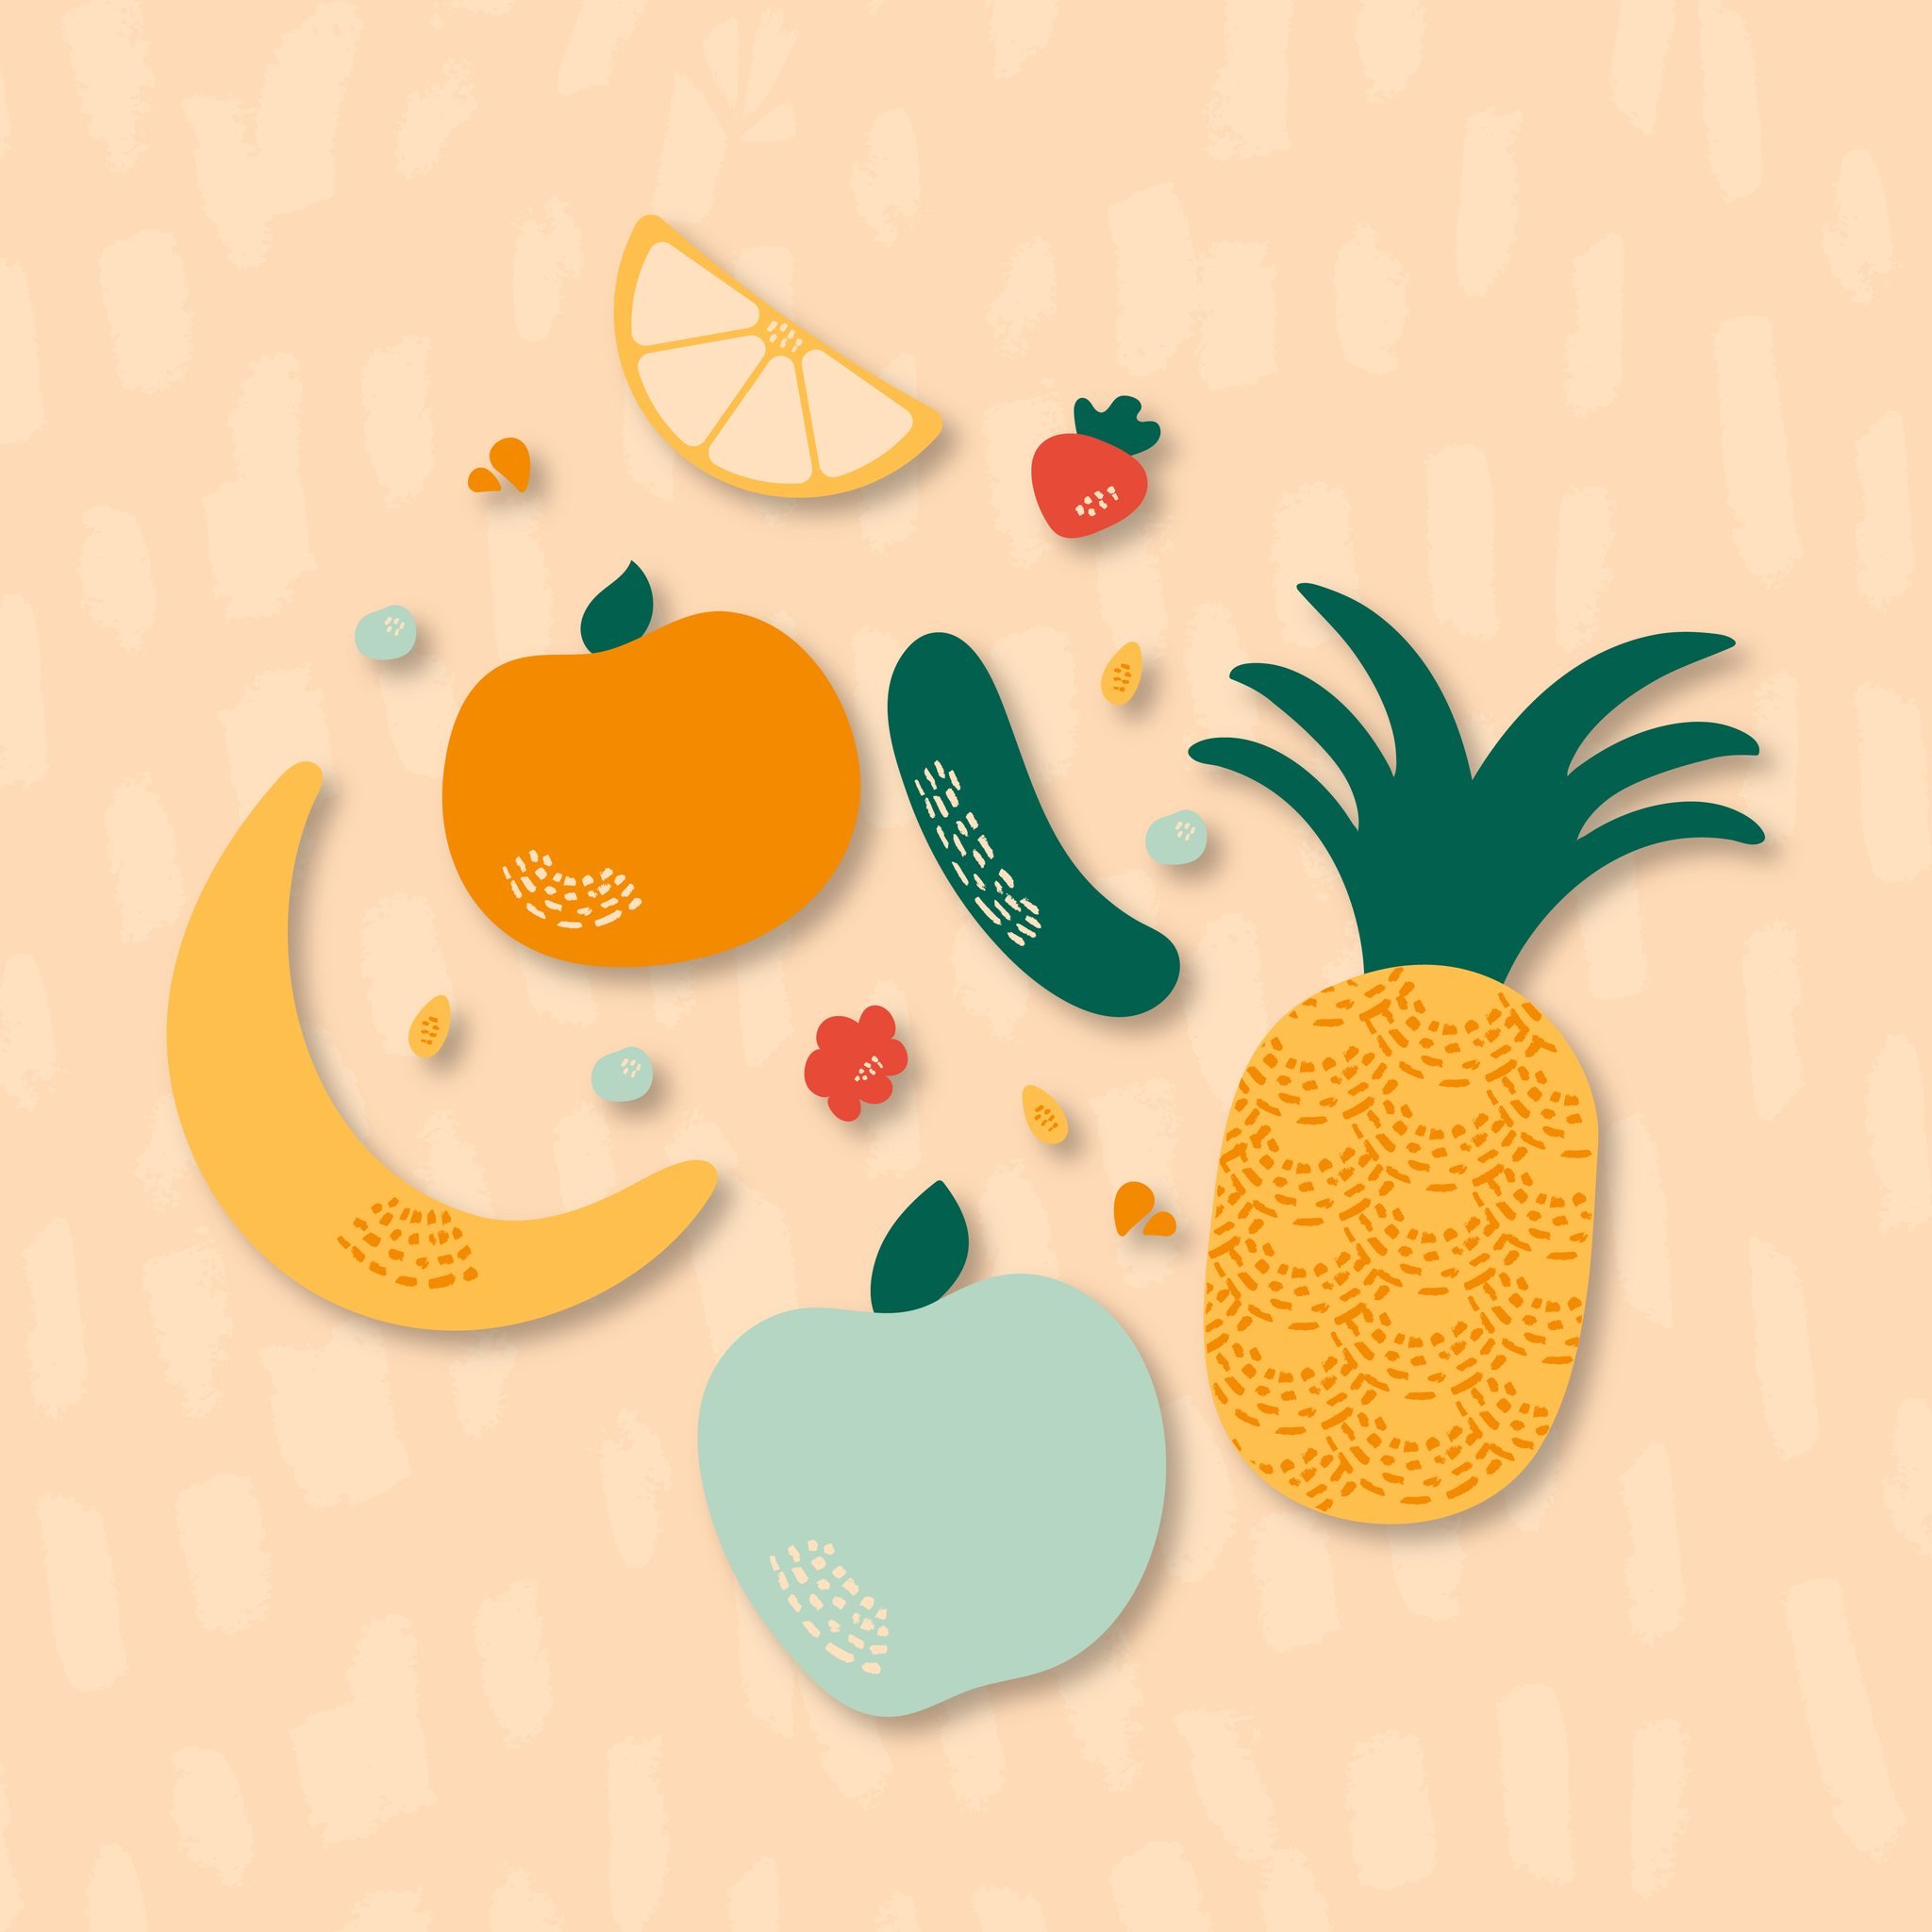 throwback to some illustrations i made for one of my favourite client projects ever ✨🍍

it's so cool how you can turn a simple shape into a fun illustration thanks to color and a textured brush!! i definitely need to use brushes like these more!

#g